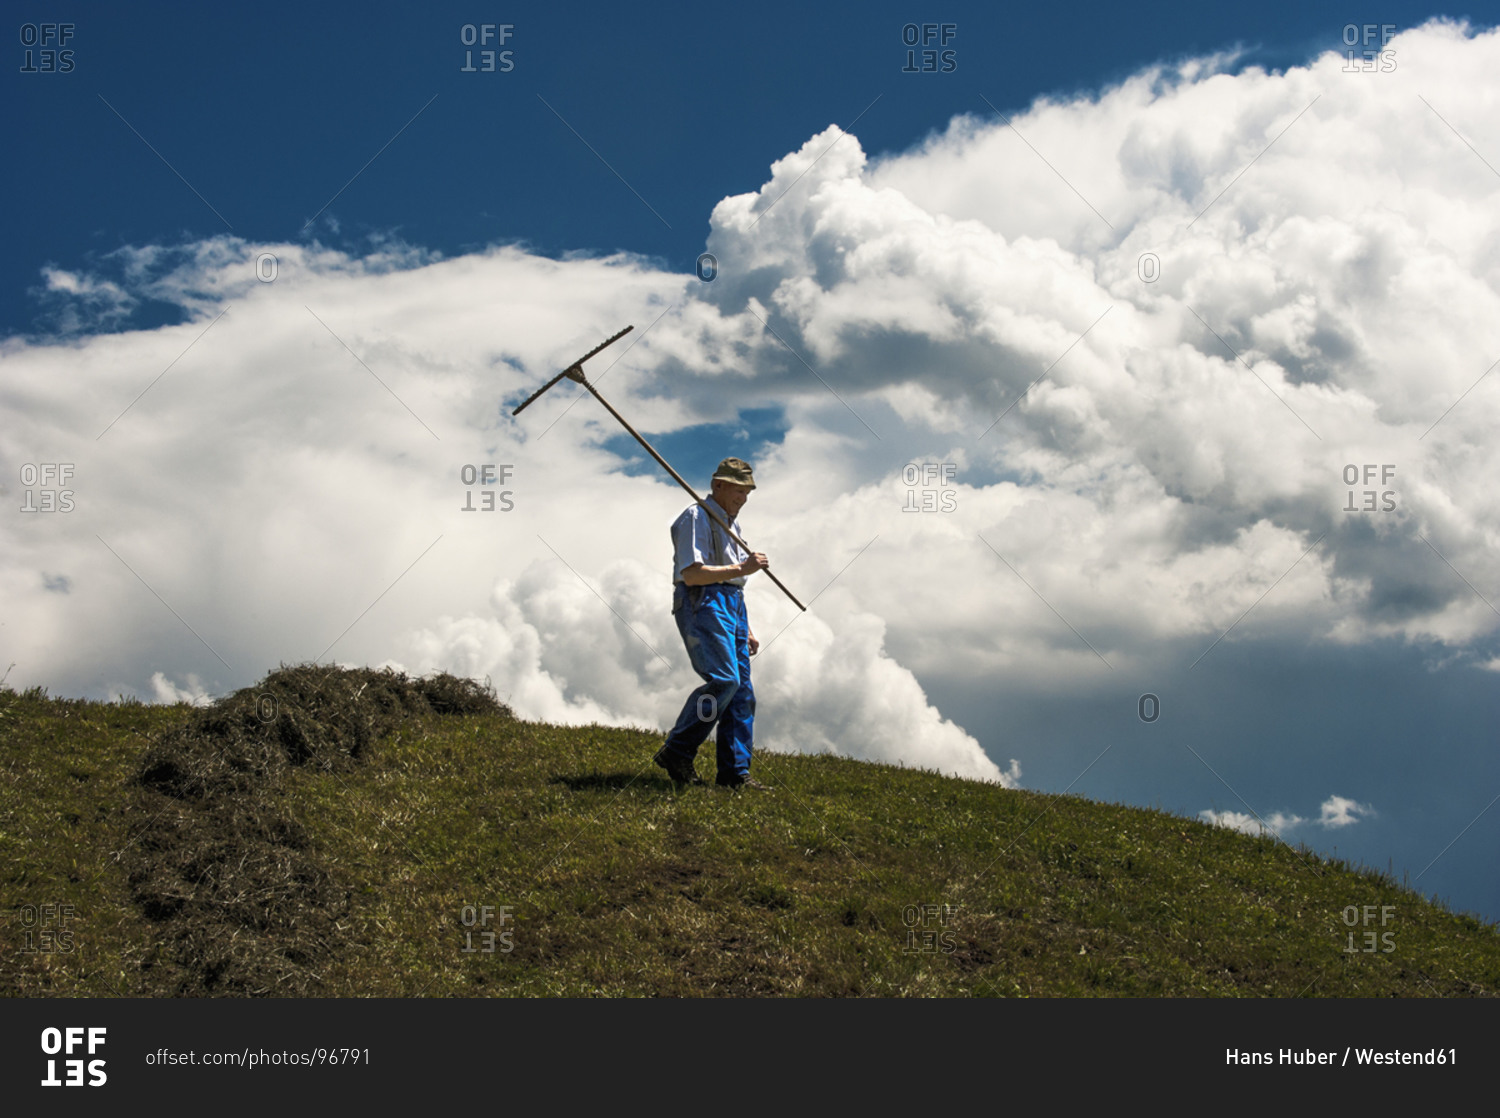 Austria, Radstadt, farmer on field, upcoming thunderstorm in the background